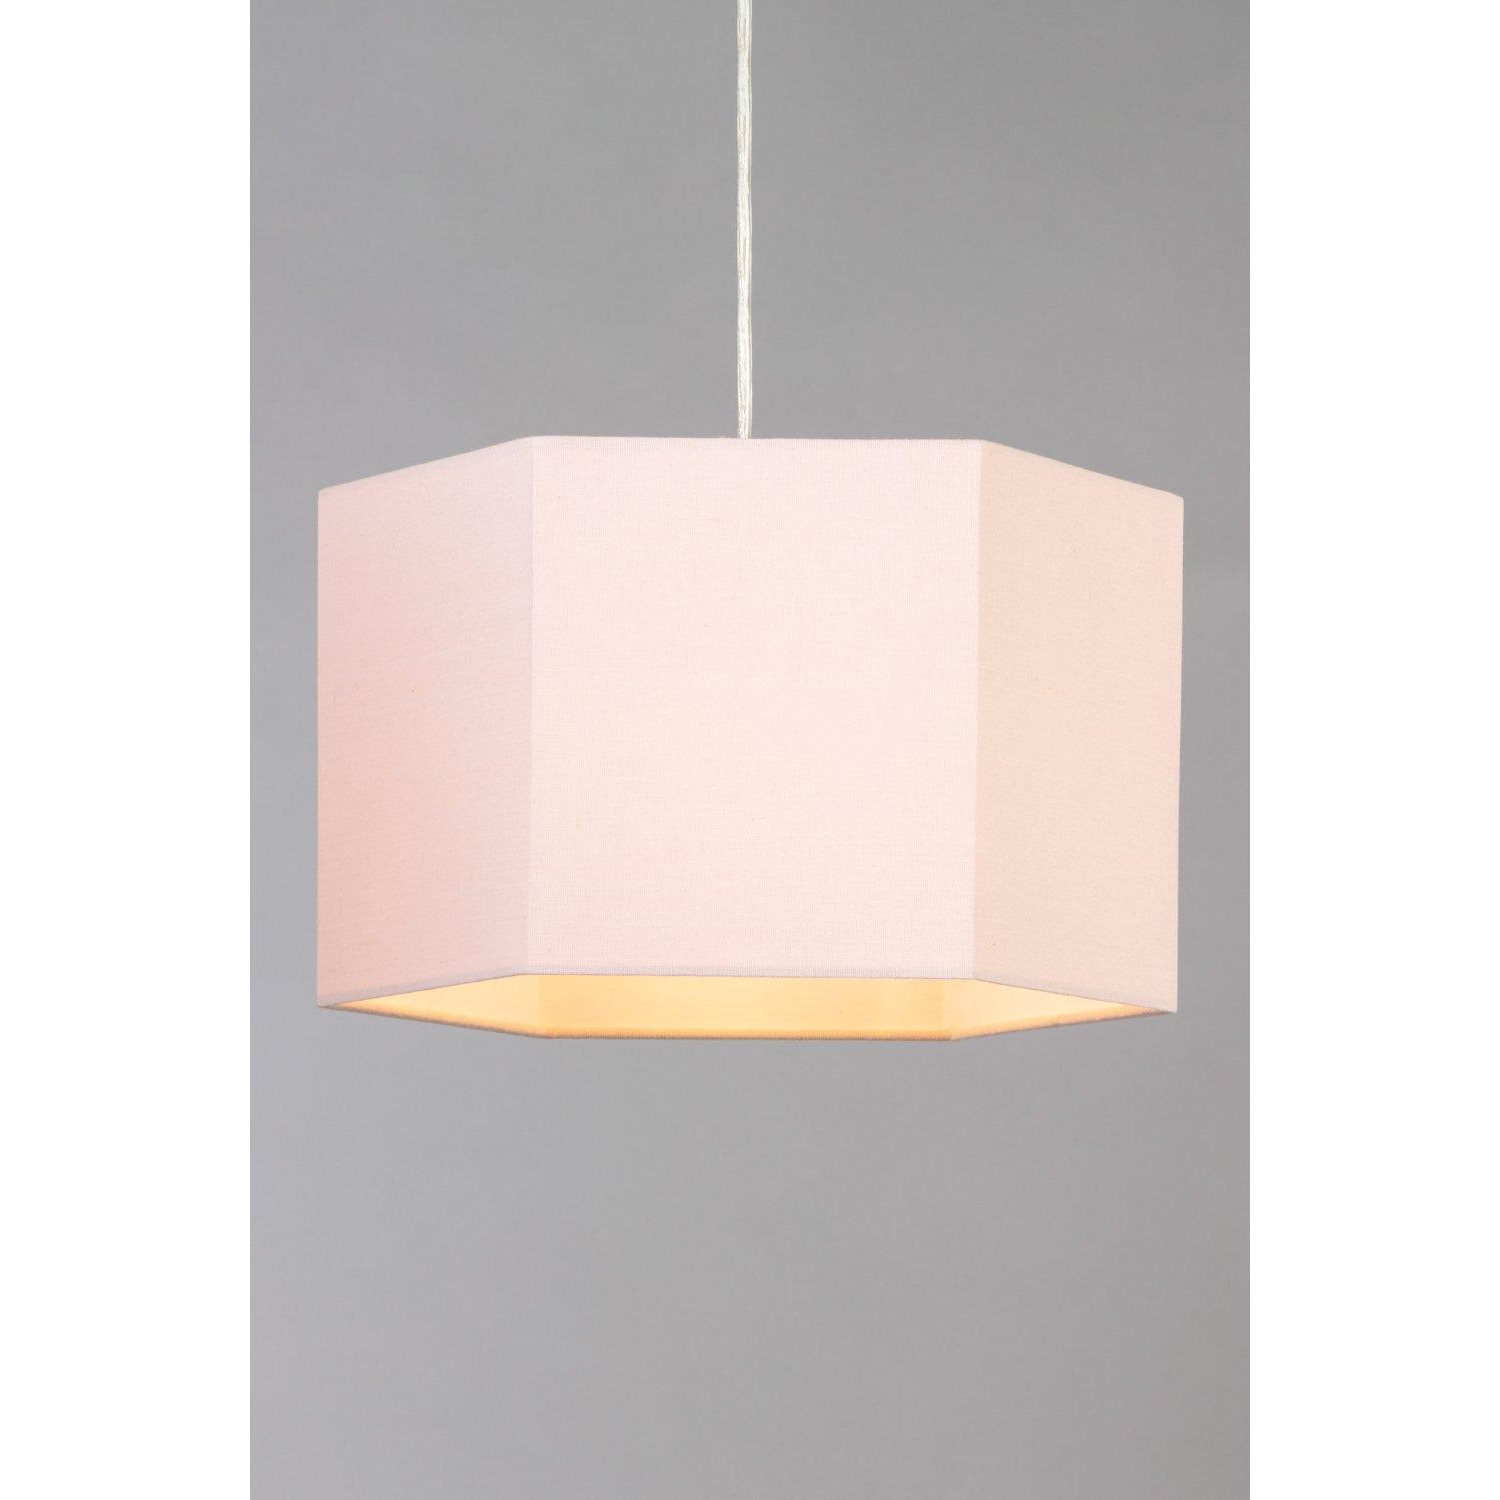 Glow Hexagon Easy Fit Light Shade - image 1